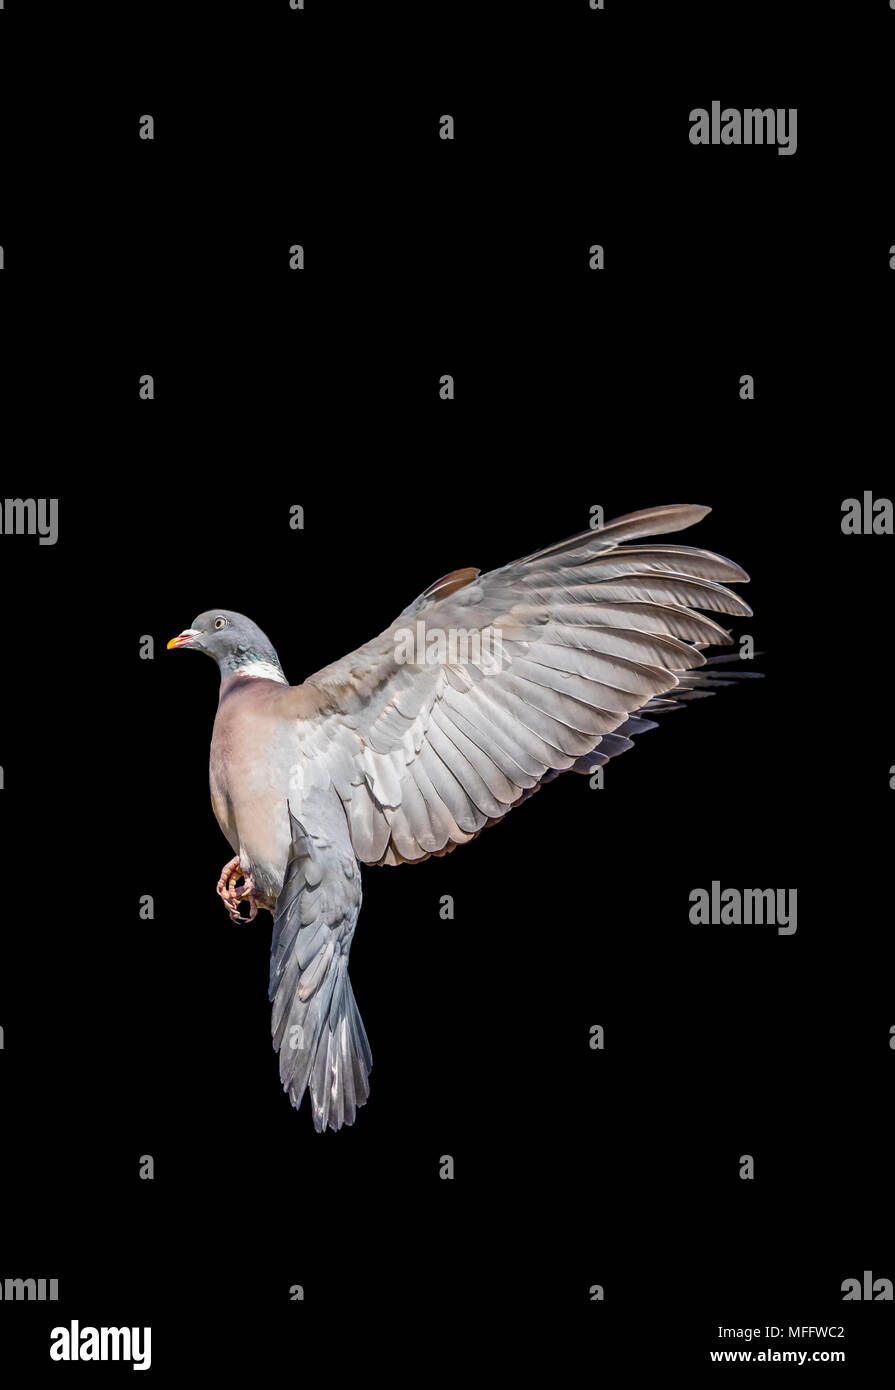 Common Wood Pigeon (Columba palumbus) hovering in midair, cutout with a black background. Wood Pigeon wings stretched  back. Flying pigeon. Stock Photo